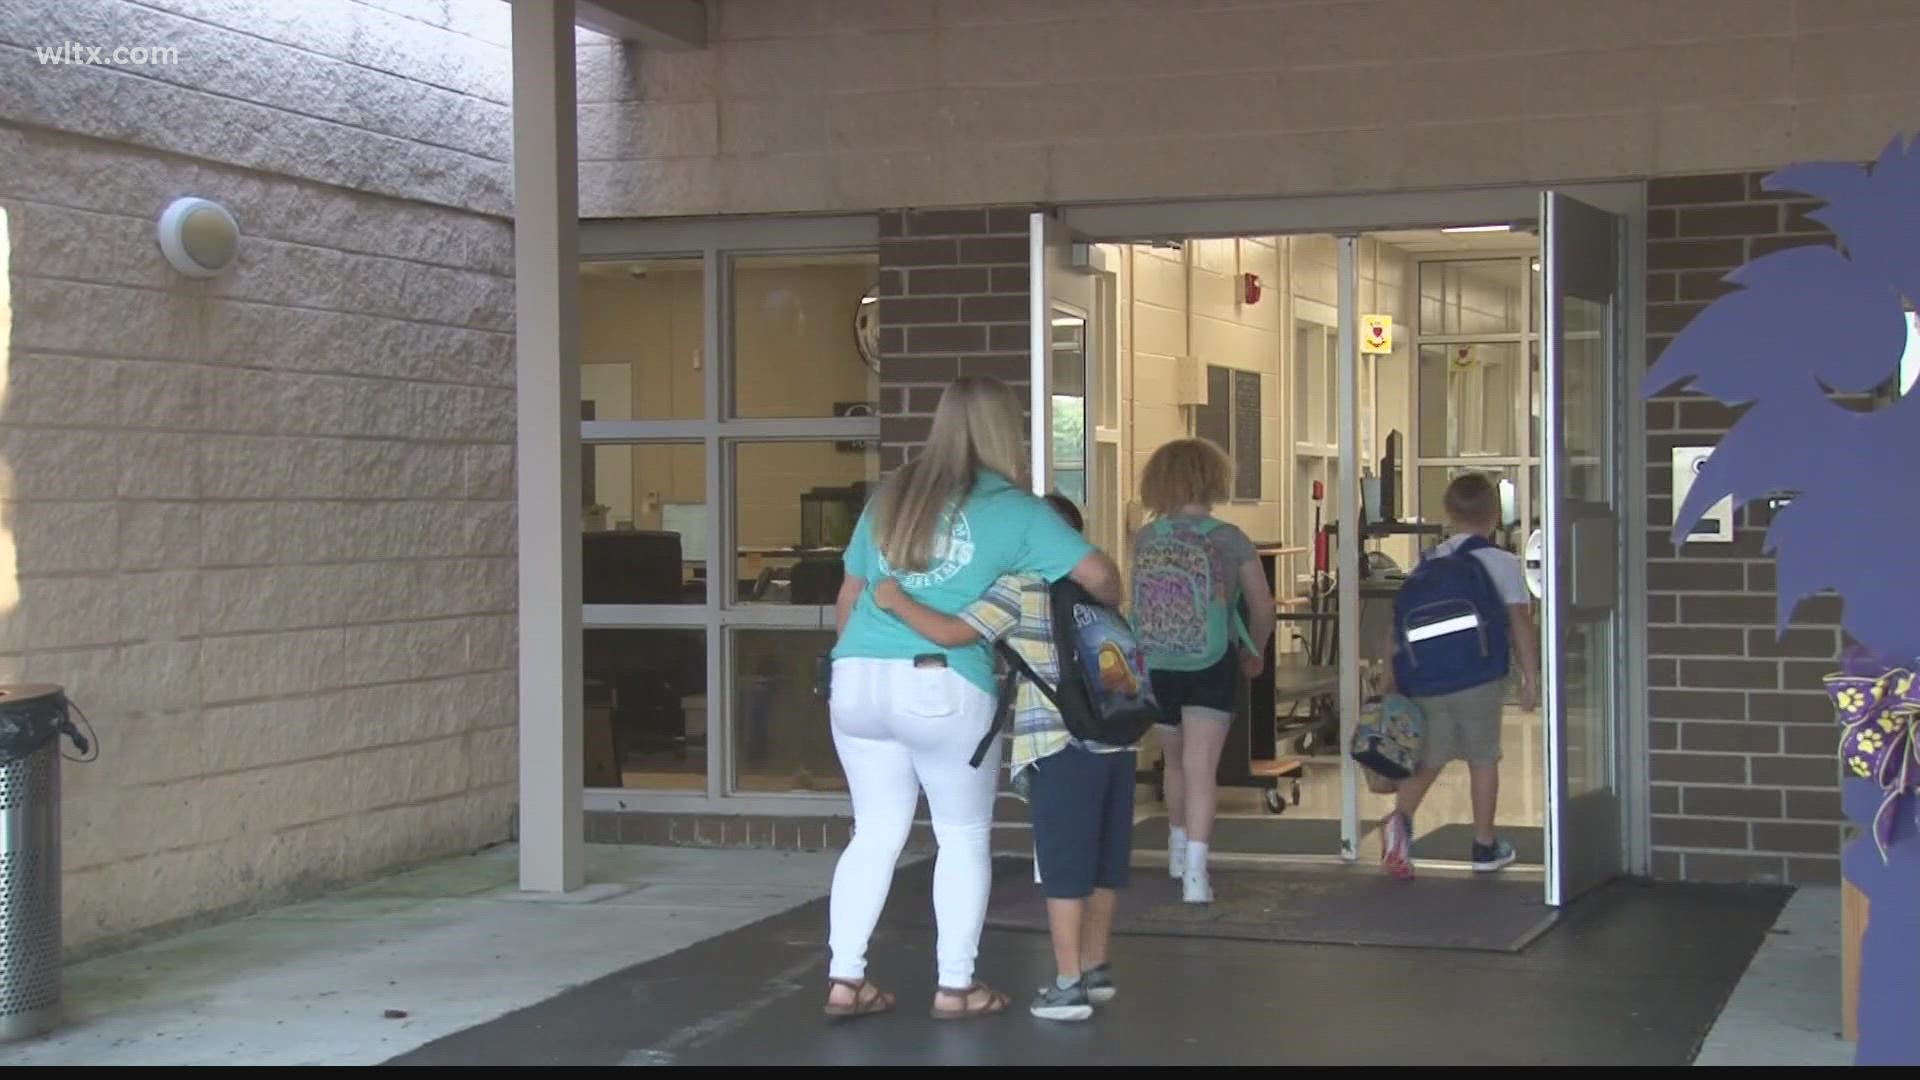 Both parents and students were a little nervous about the first day of school.